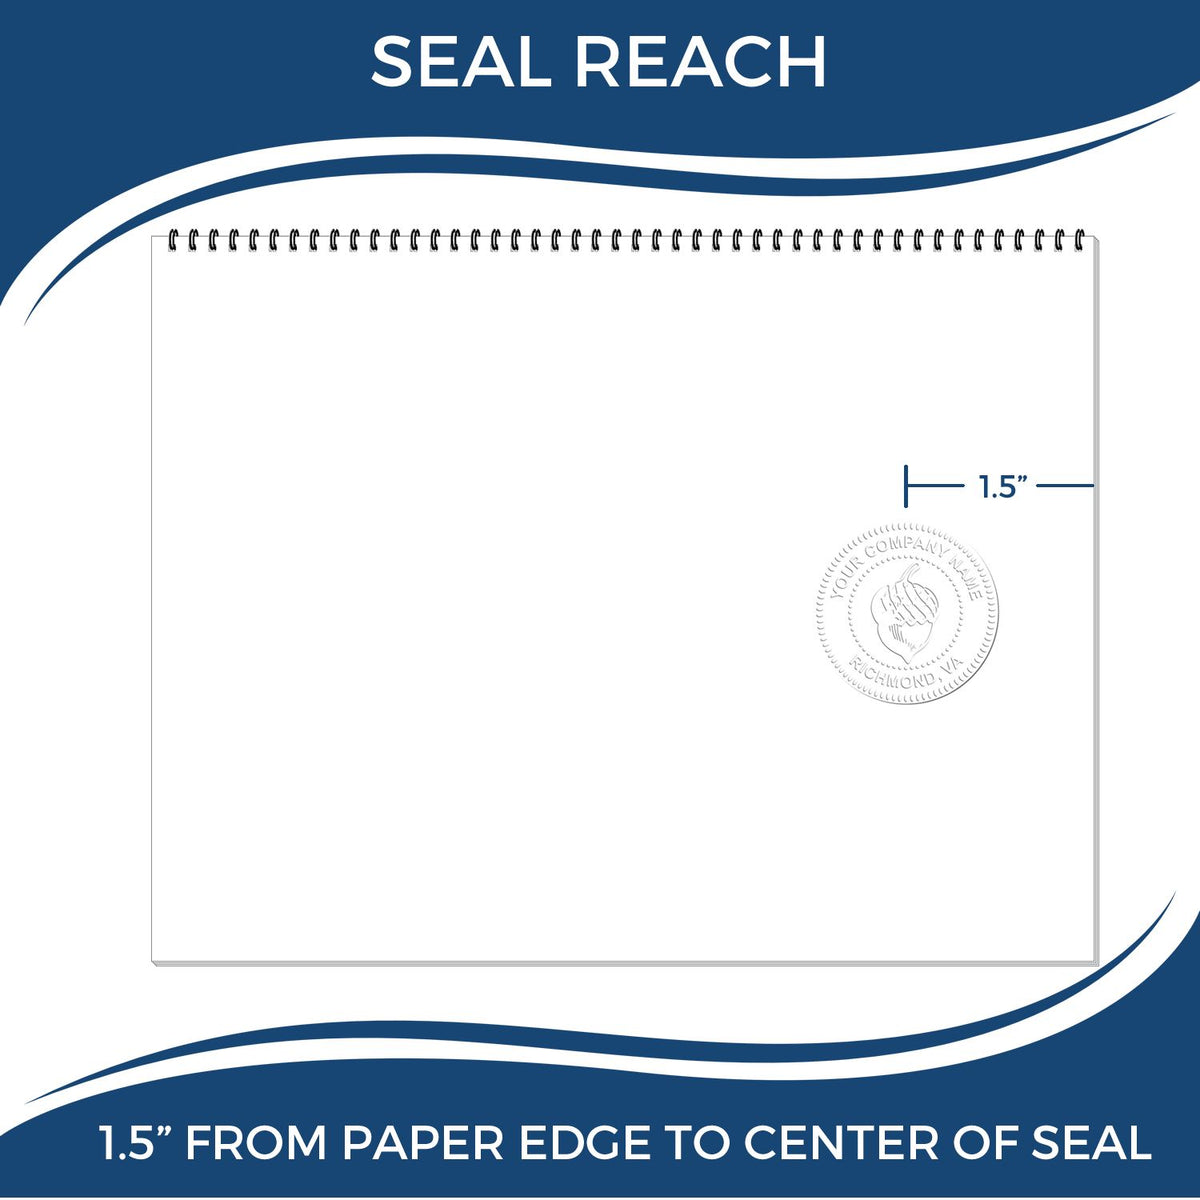 An infographic showing the seal reach which is represented by a ruler and a miniature seal image of the Handheld Nevada Land Surveyor Seal